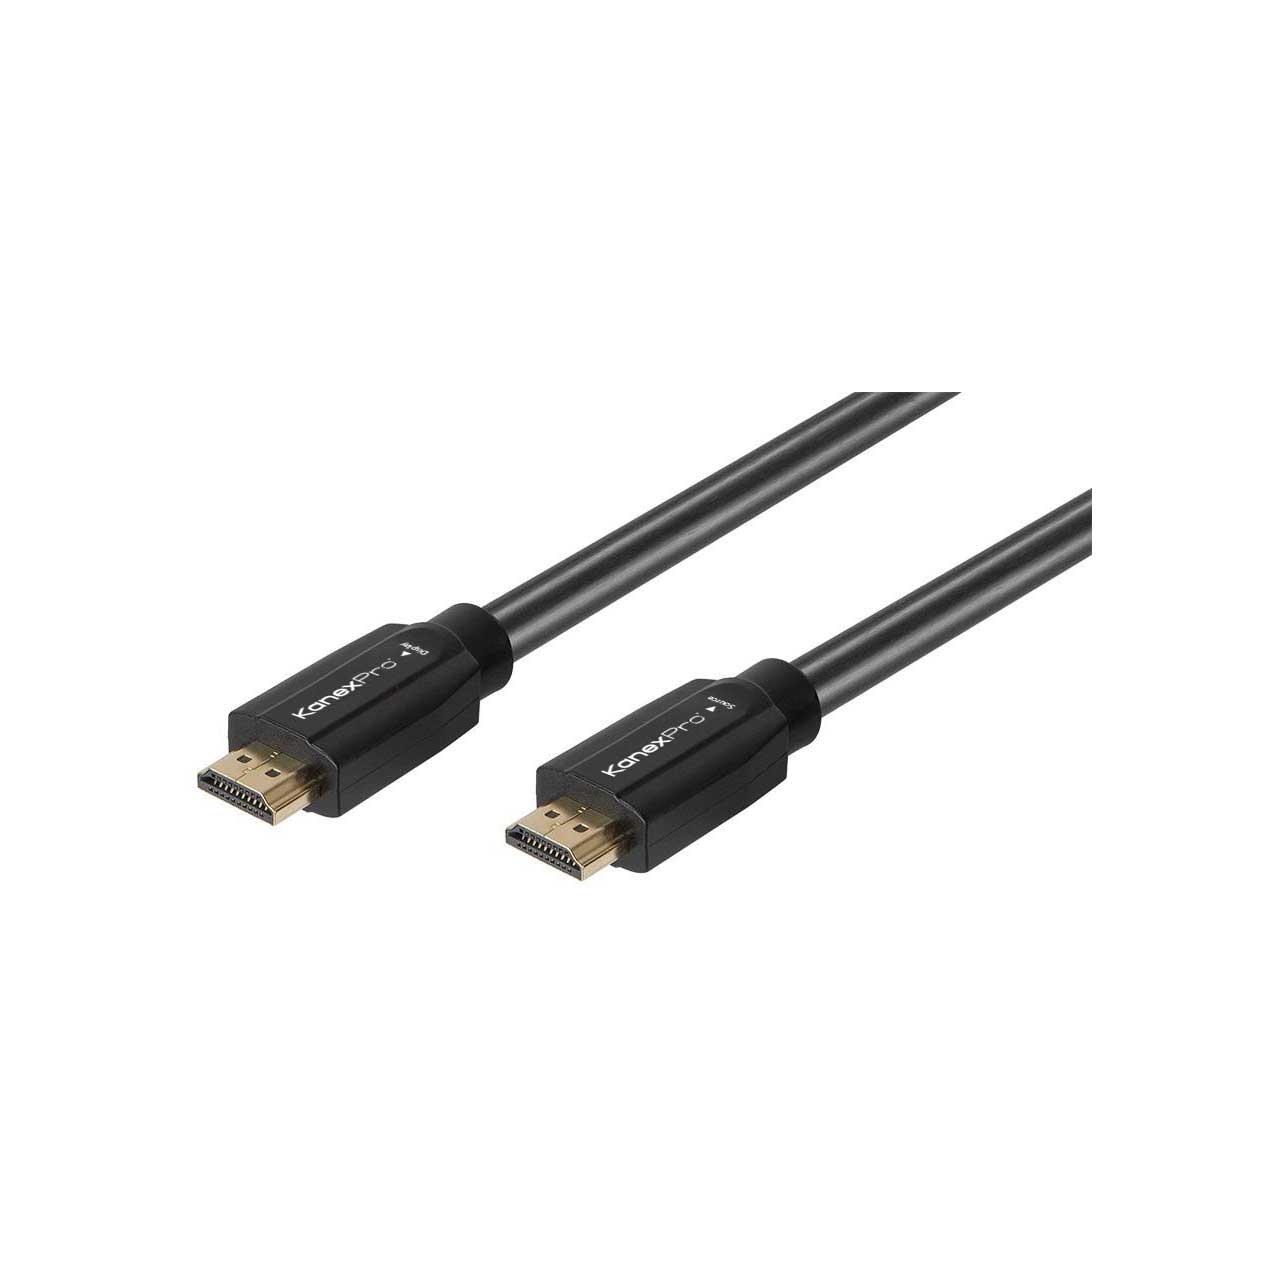 KanexPro CBL-HT7180HDMI Active High Speed HDMI Cable CL3 Rated - 75 Foot